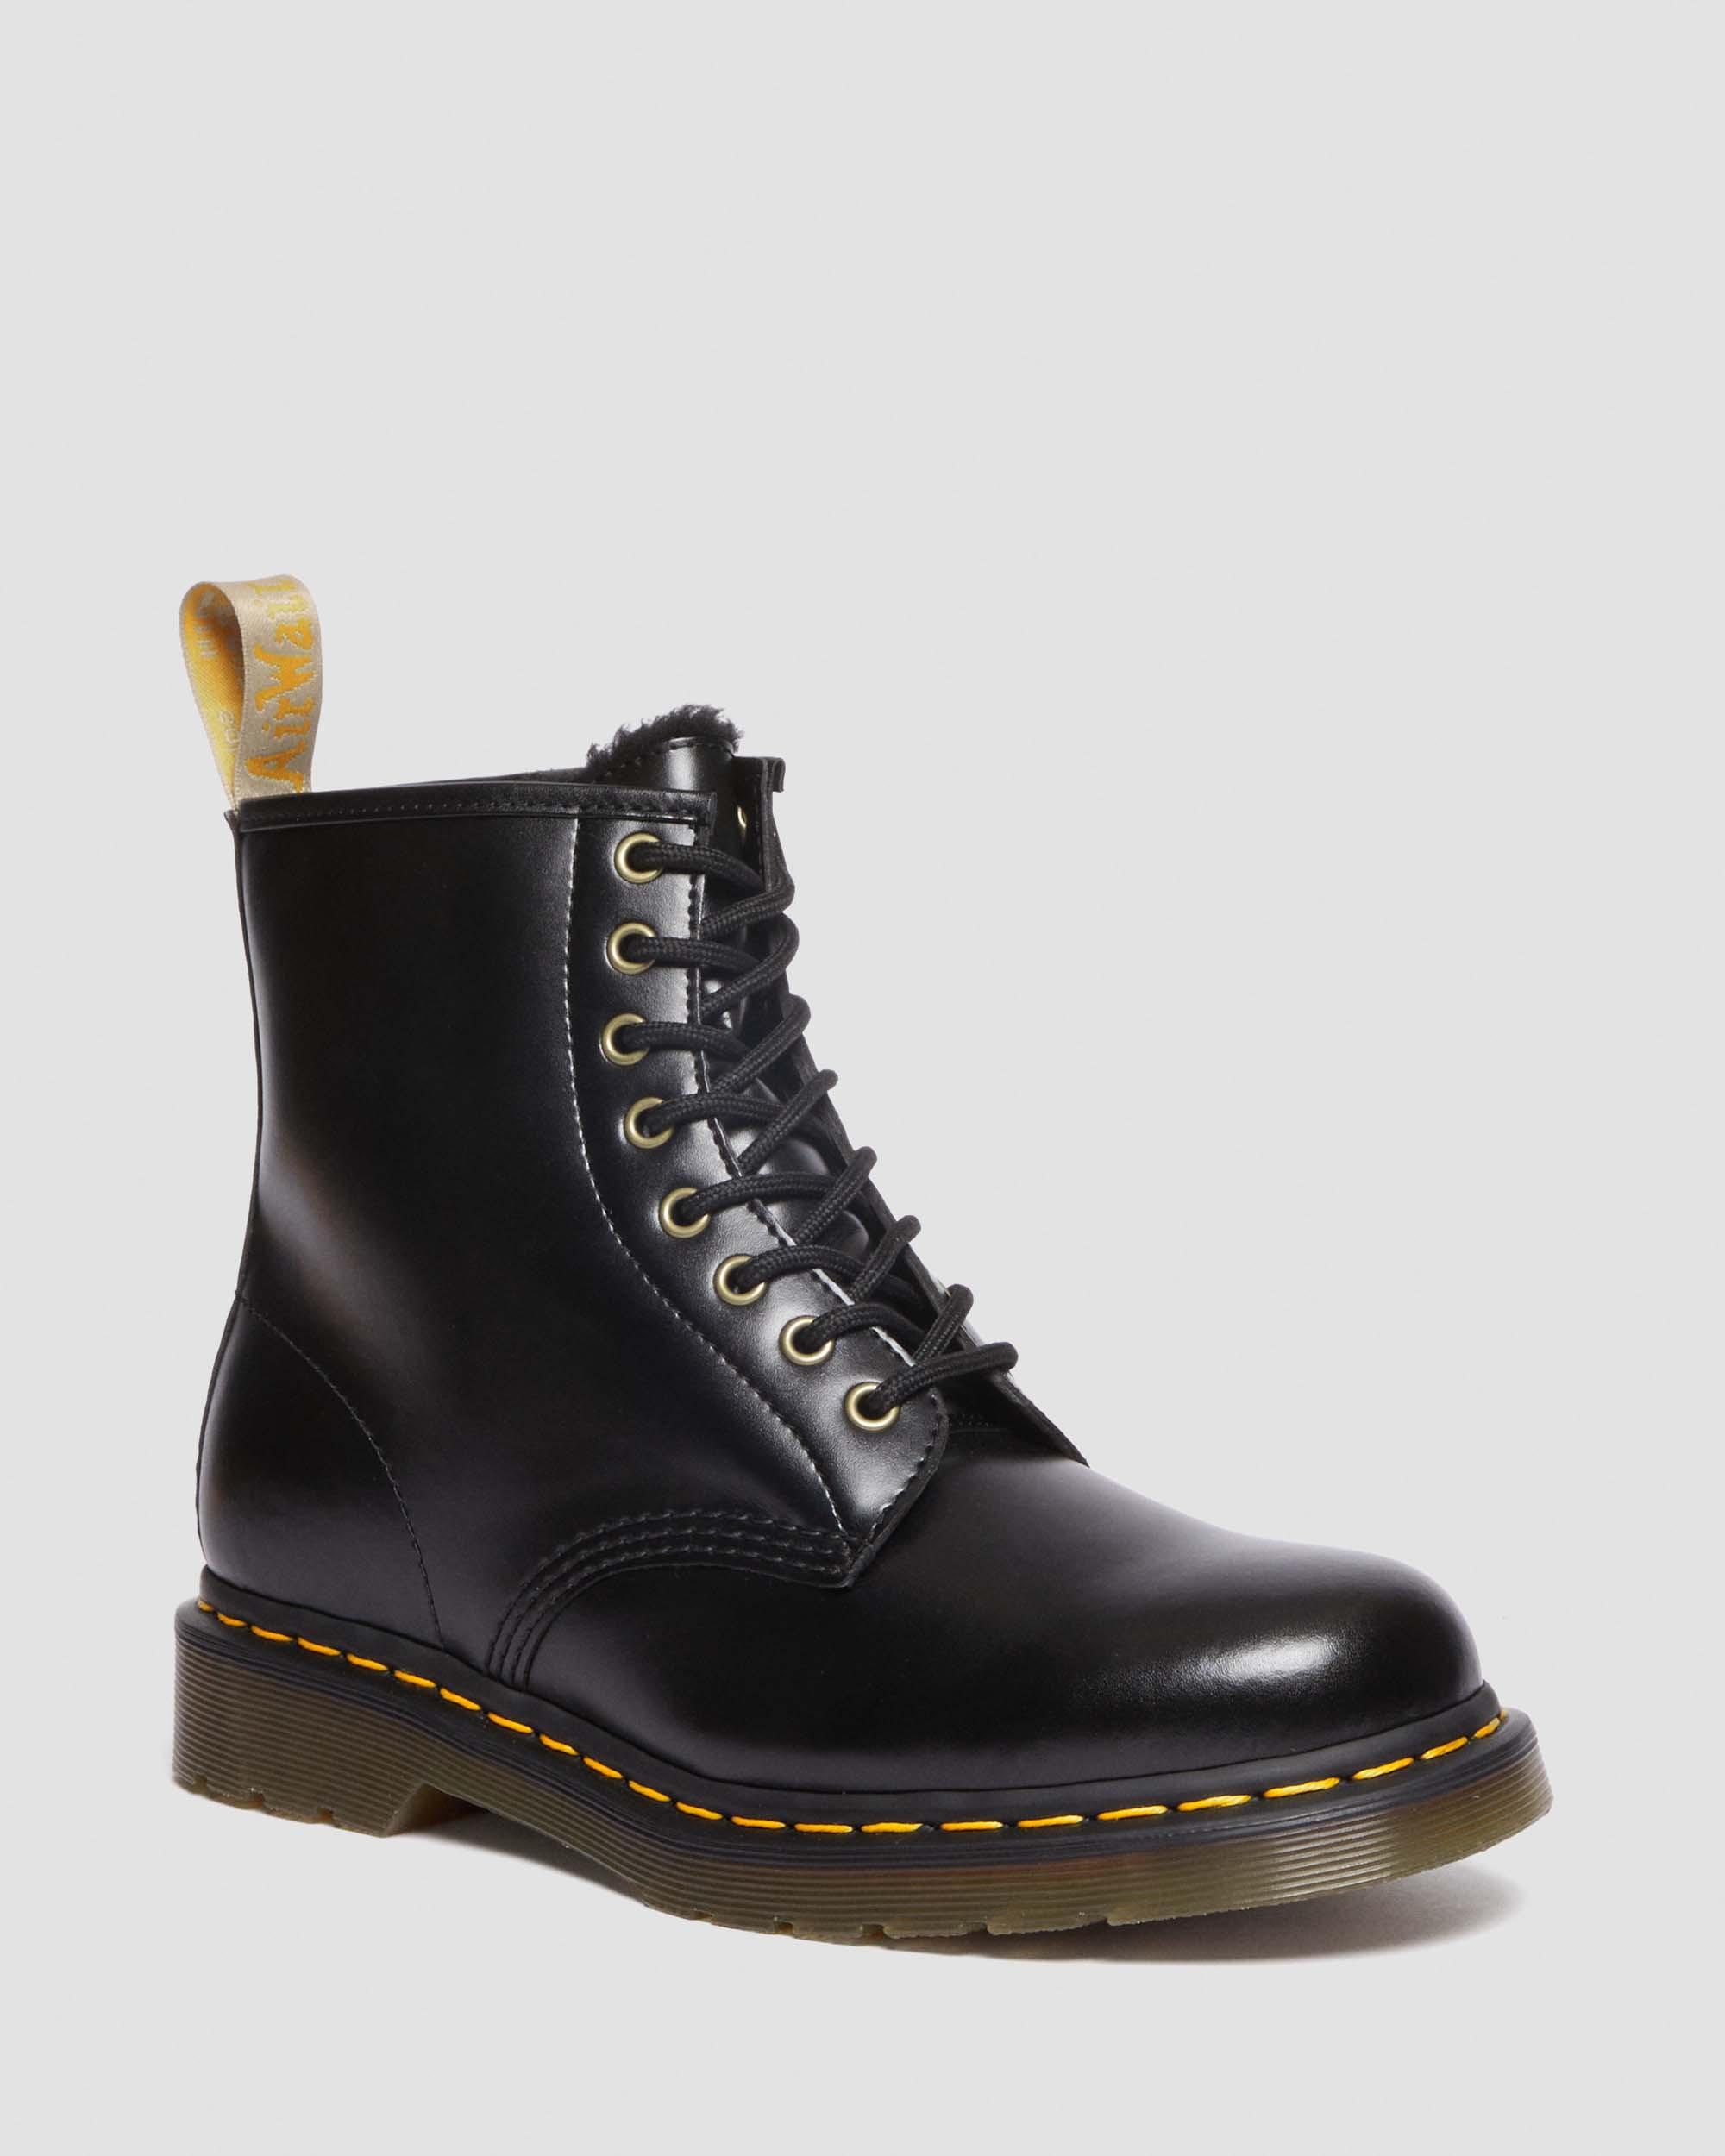 Vegan 1460 Faux Fur Lined Lace Up Boots in Black | Dr. Martens